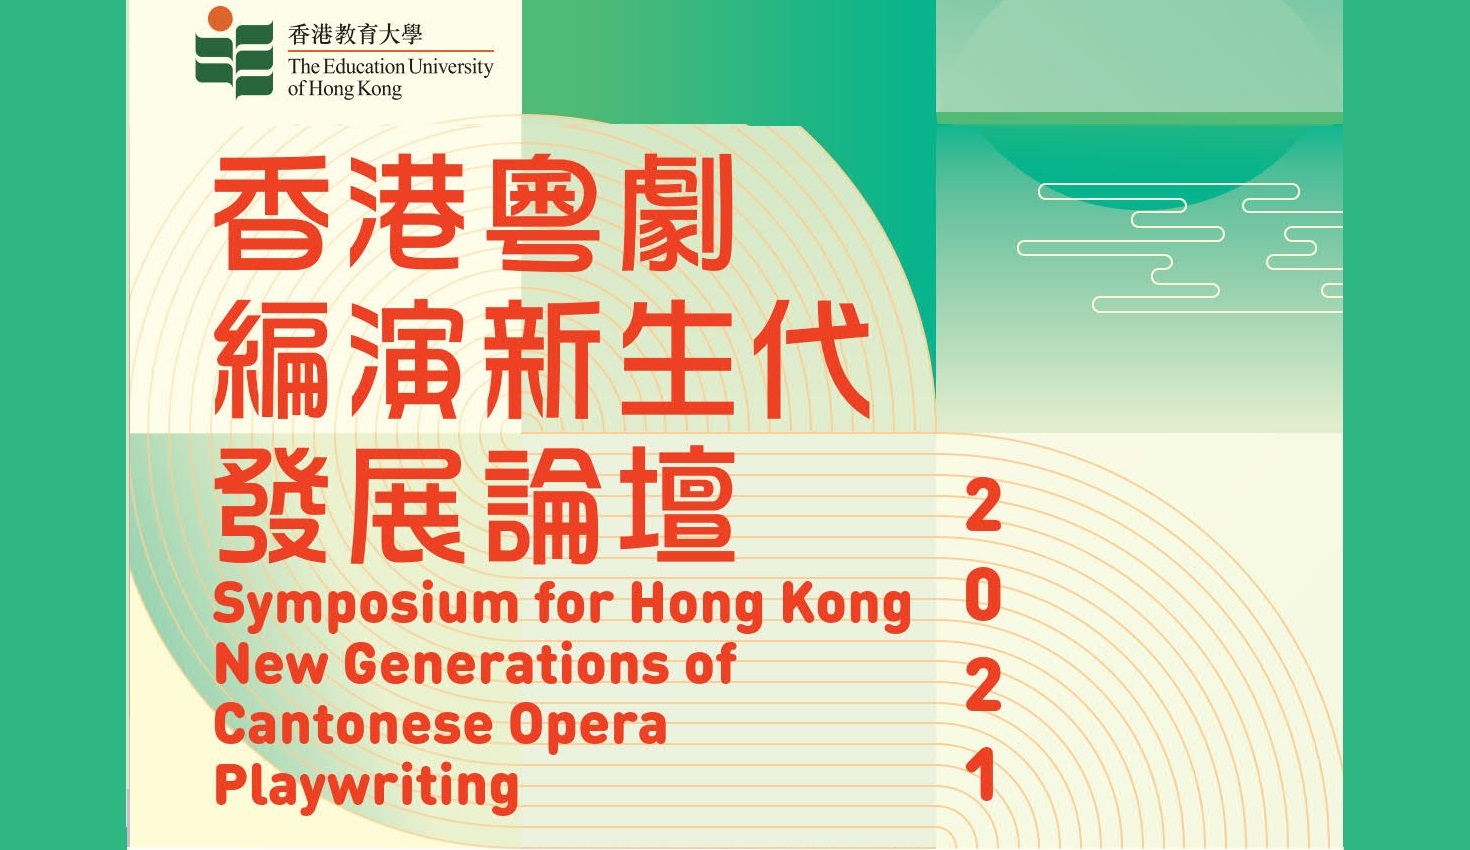 The Symposium For Hong Kong New Generations Of Cantonese Opera Playwriting 2021